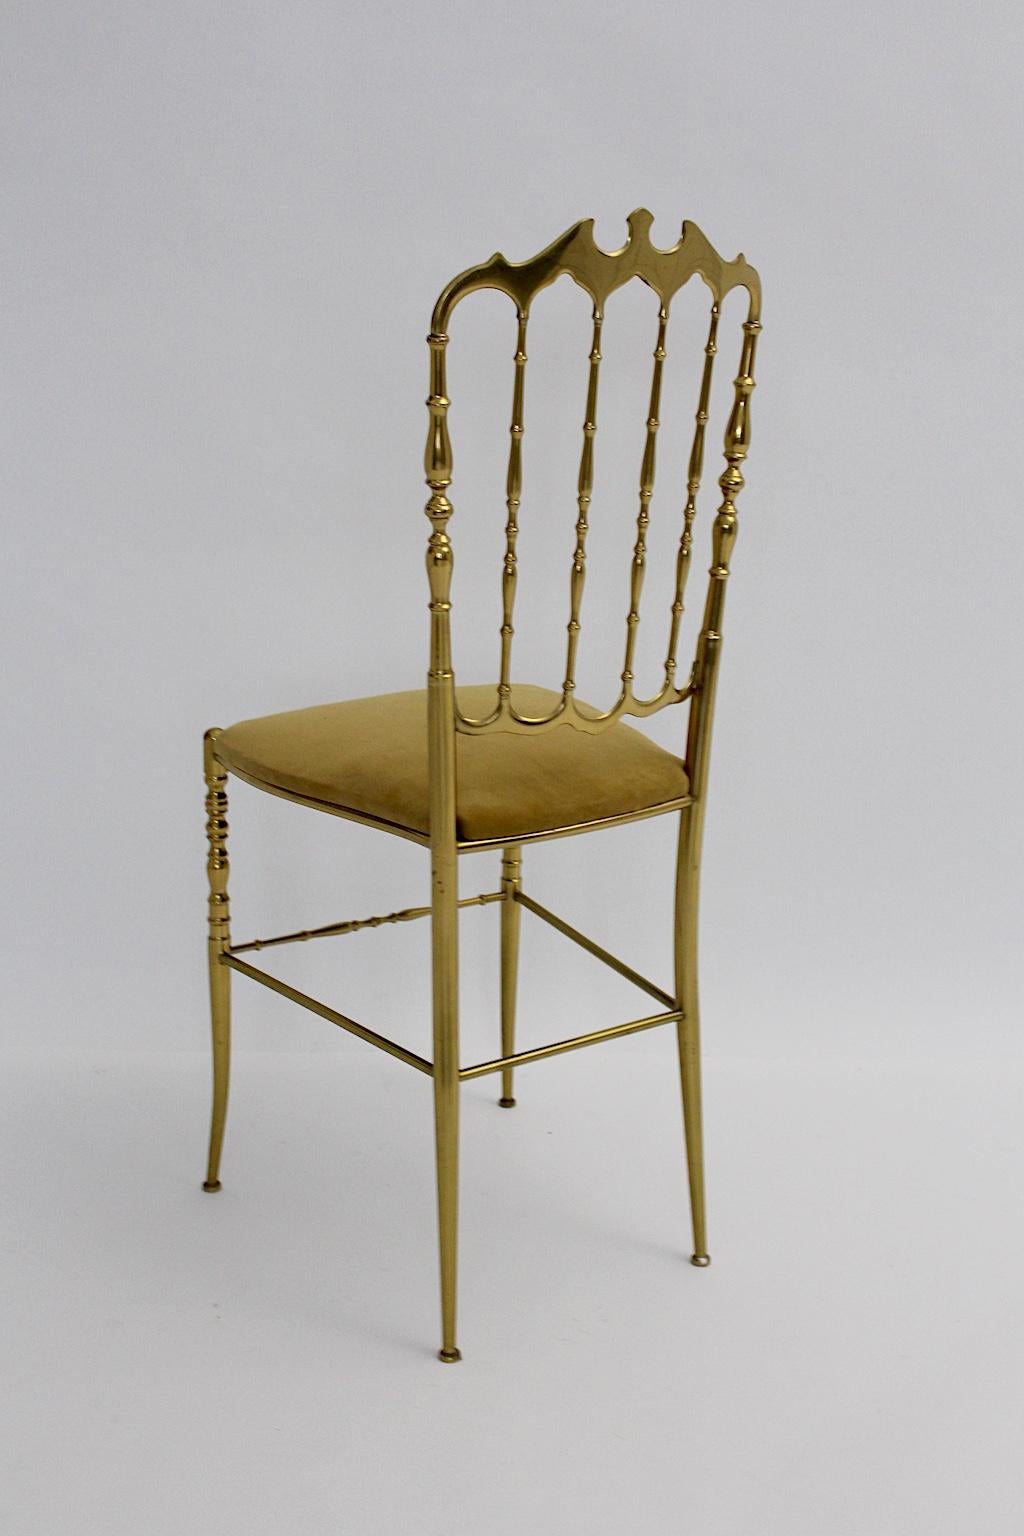 Italian Mid-Century Modern Vintage Chiavari Brass Side Chair or Chair, 1950s, Italy For Sale